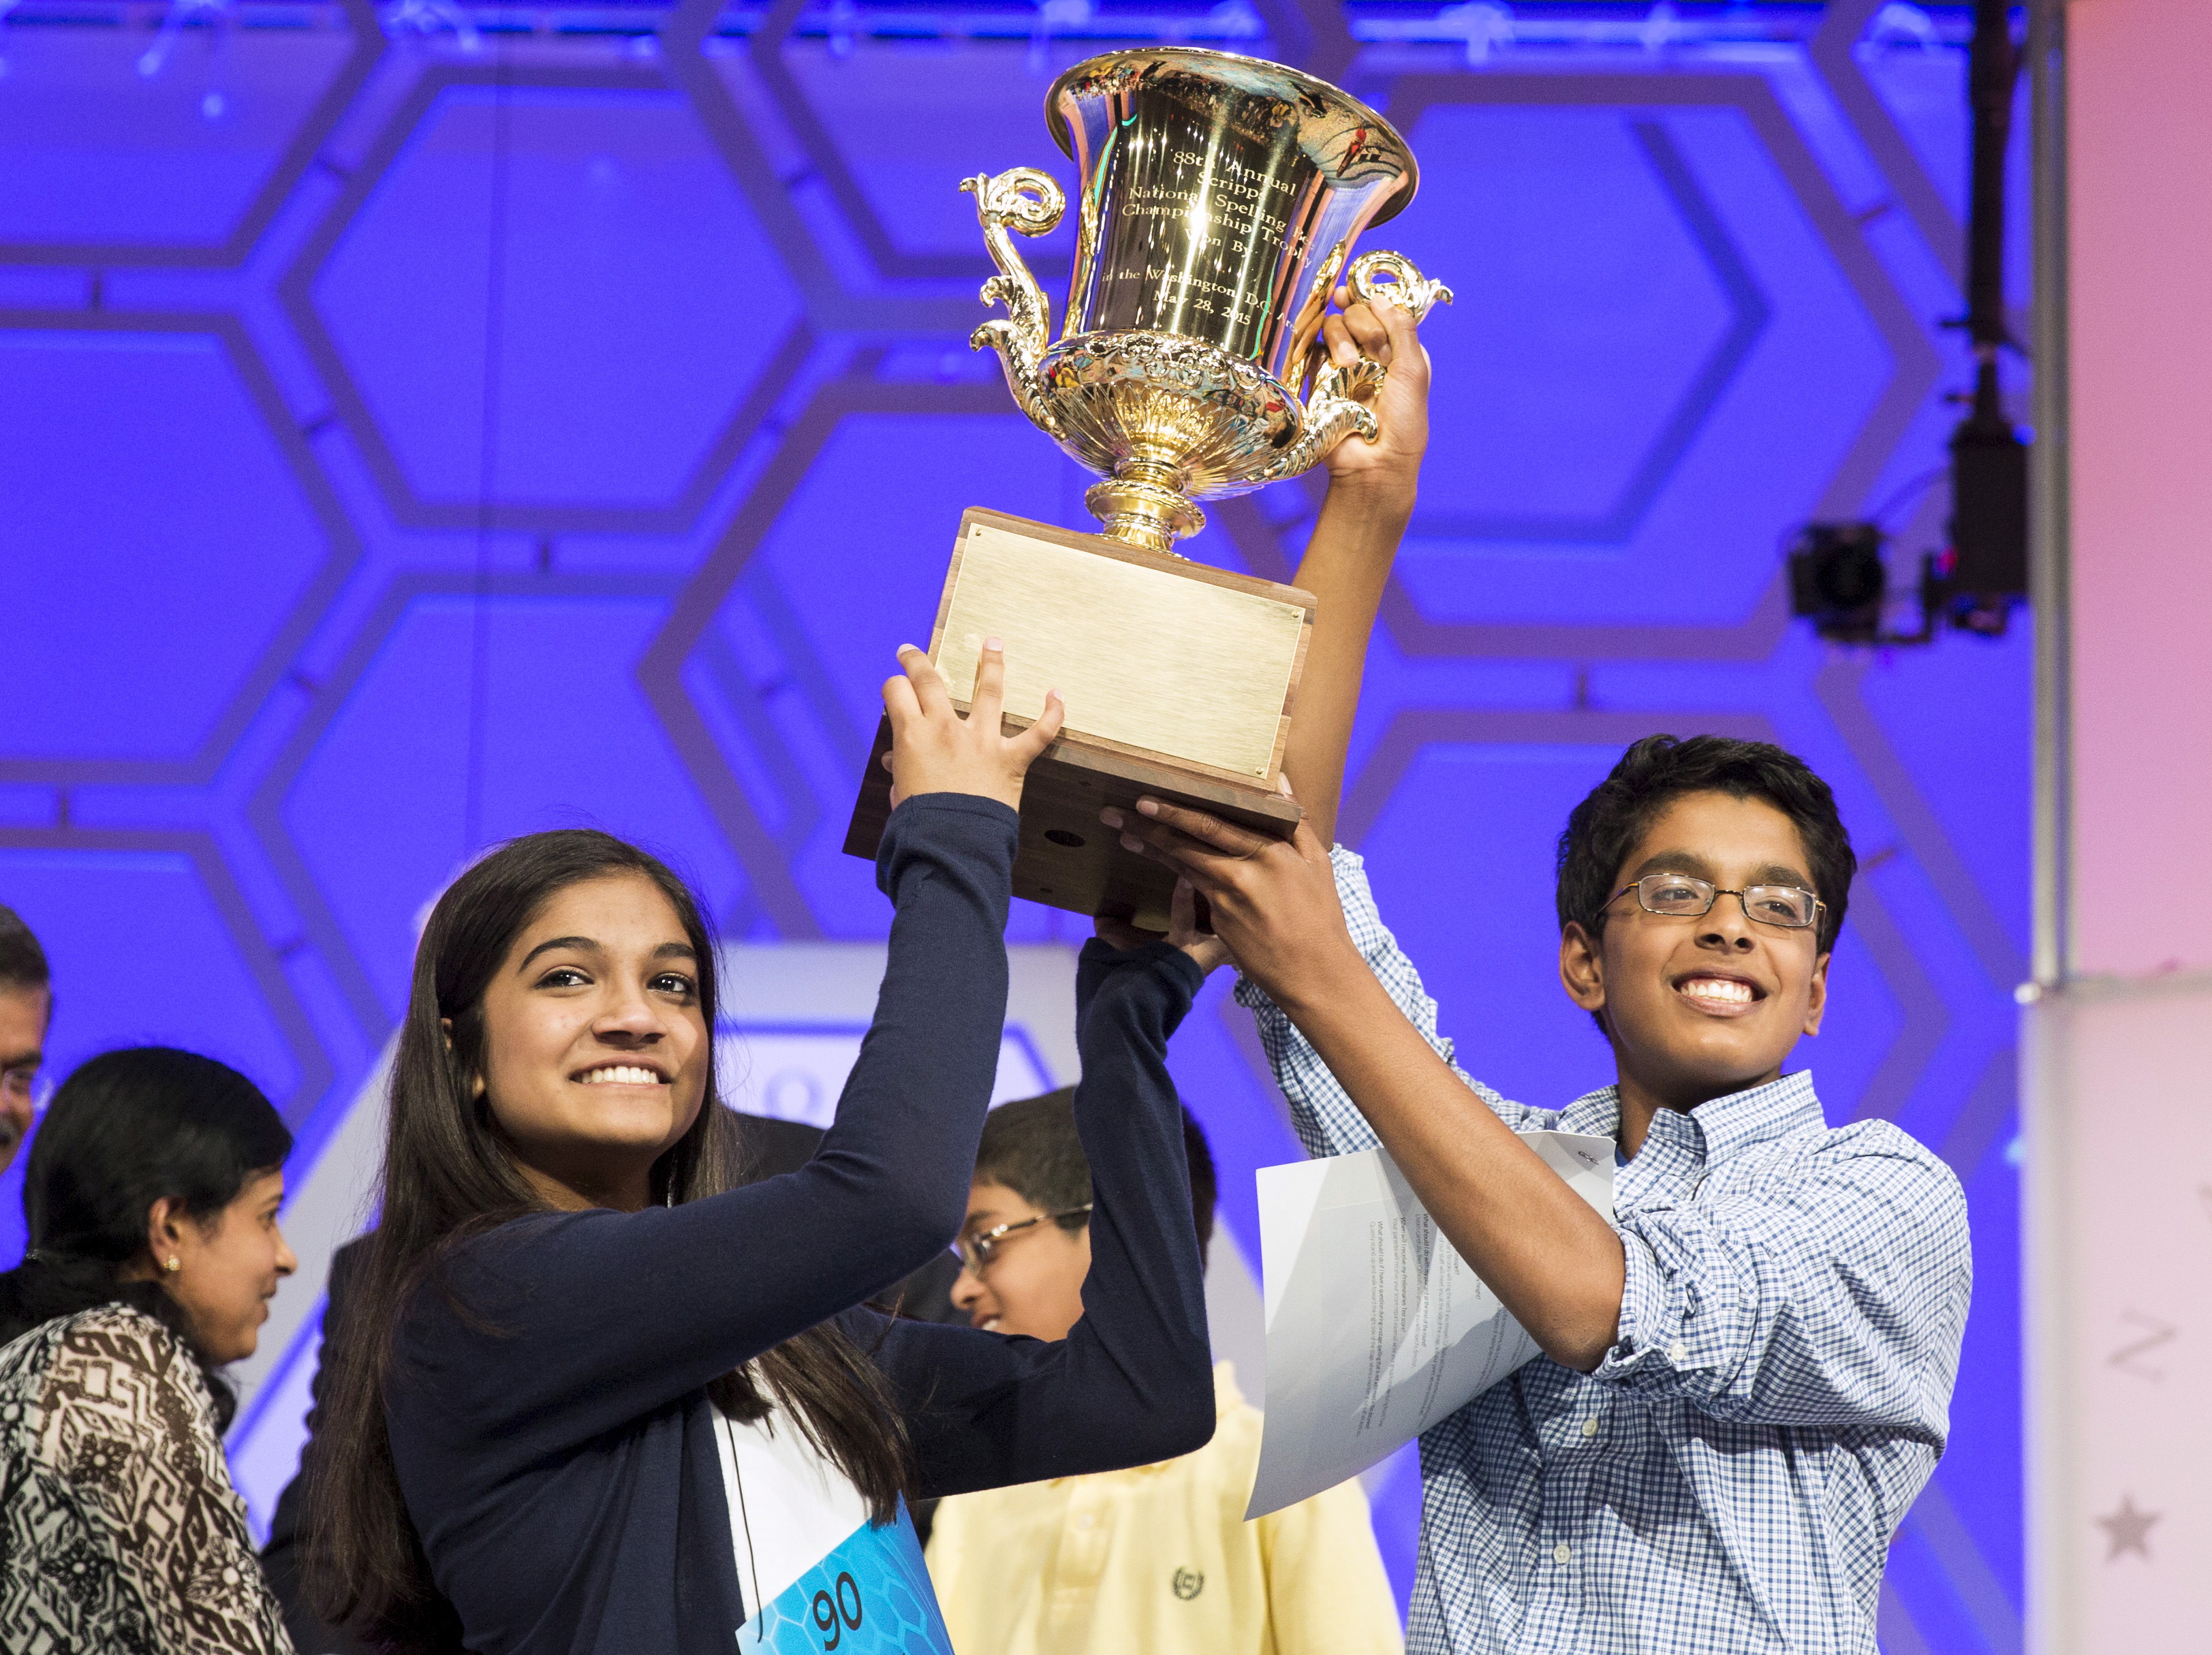 Vanya Shivashankar, left, and Gokul Venkatachalam lift the trophy after becoming co-champions after the final round of the 88th annual Scripps National Spelling Bee at National Harbor, Md., on May 28, 2015 (Joshua Roberts—Reuters)